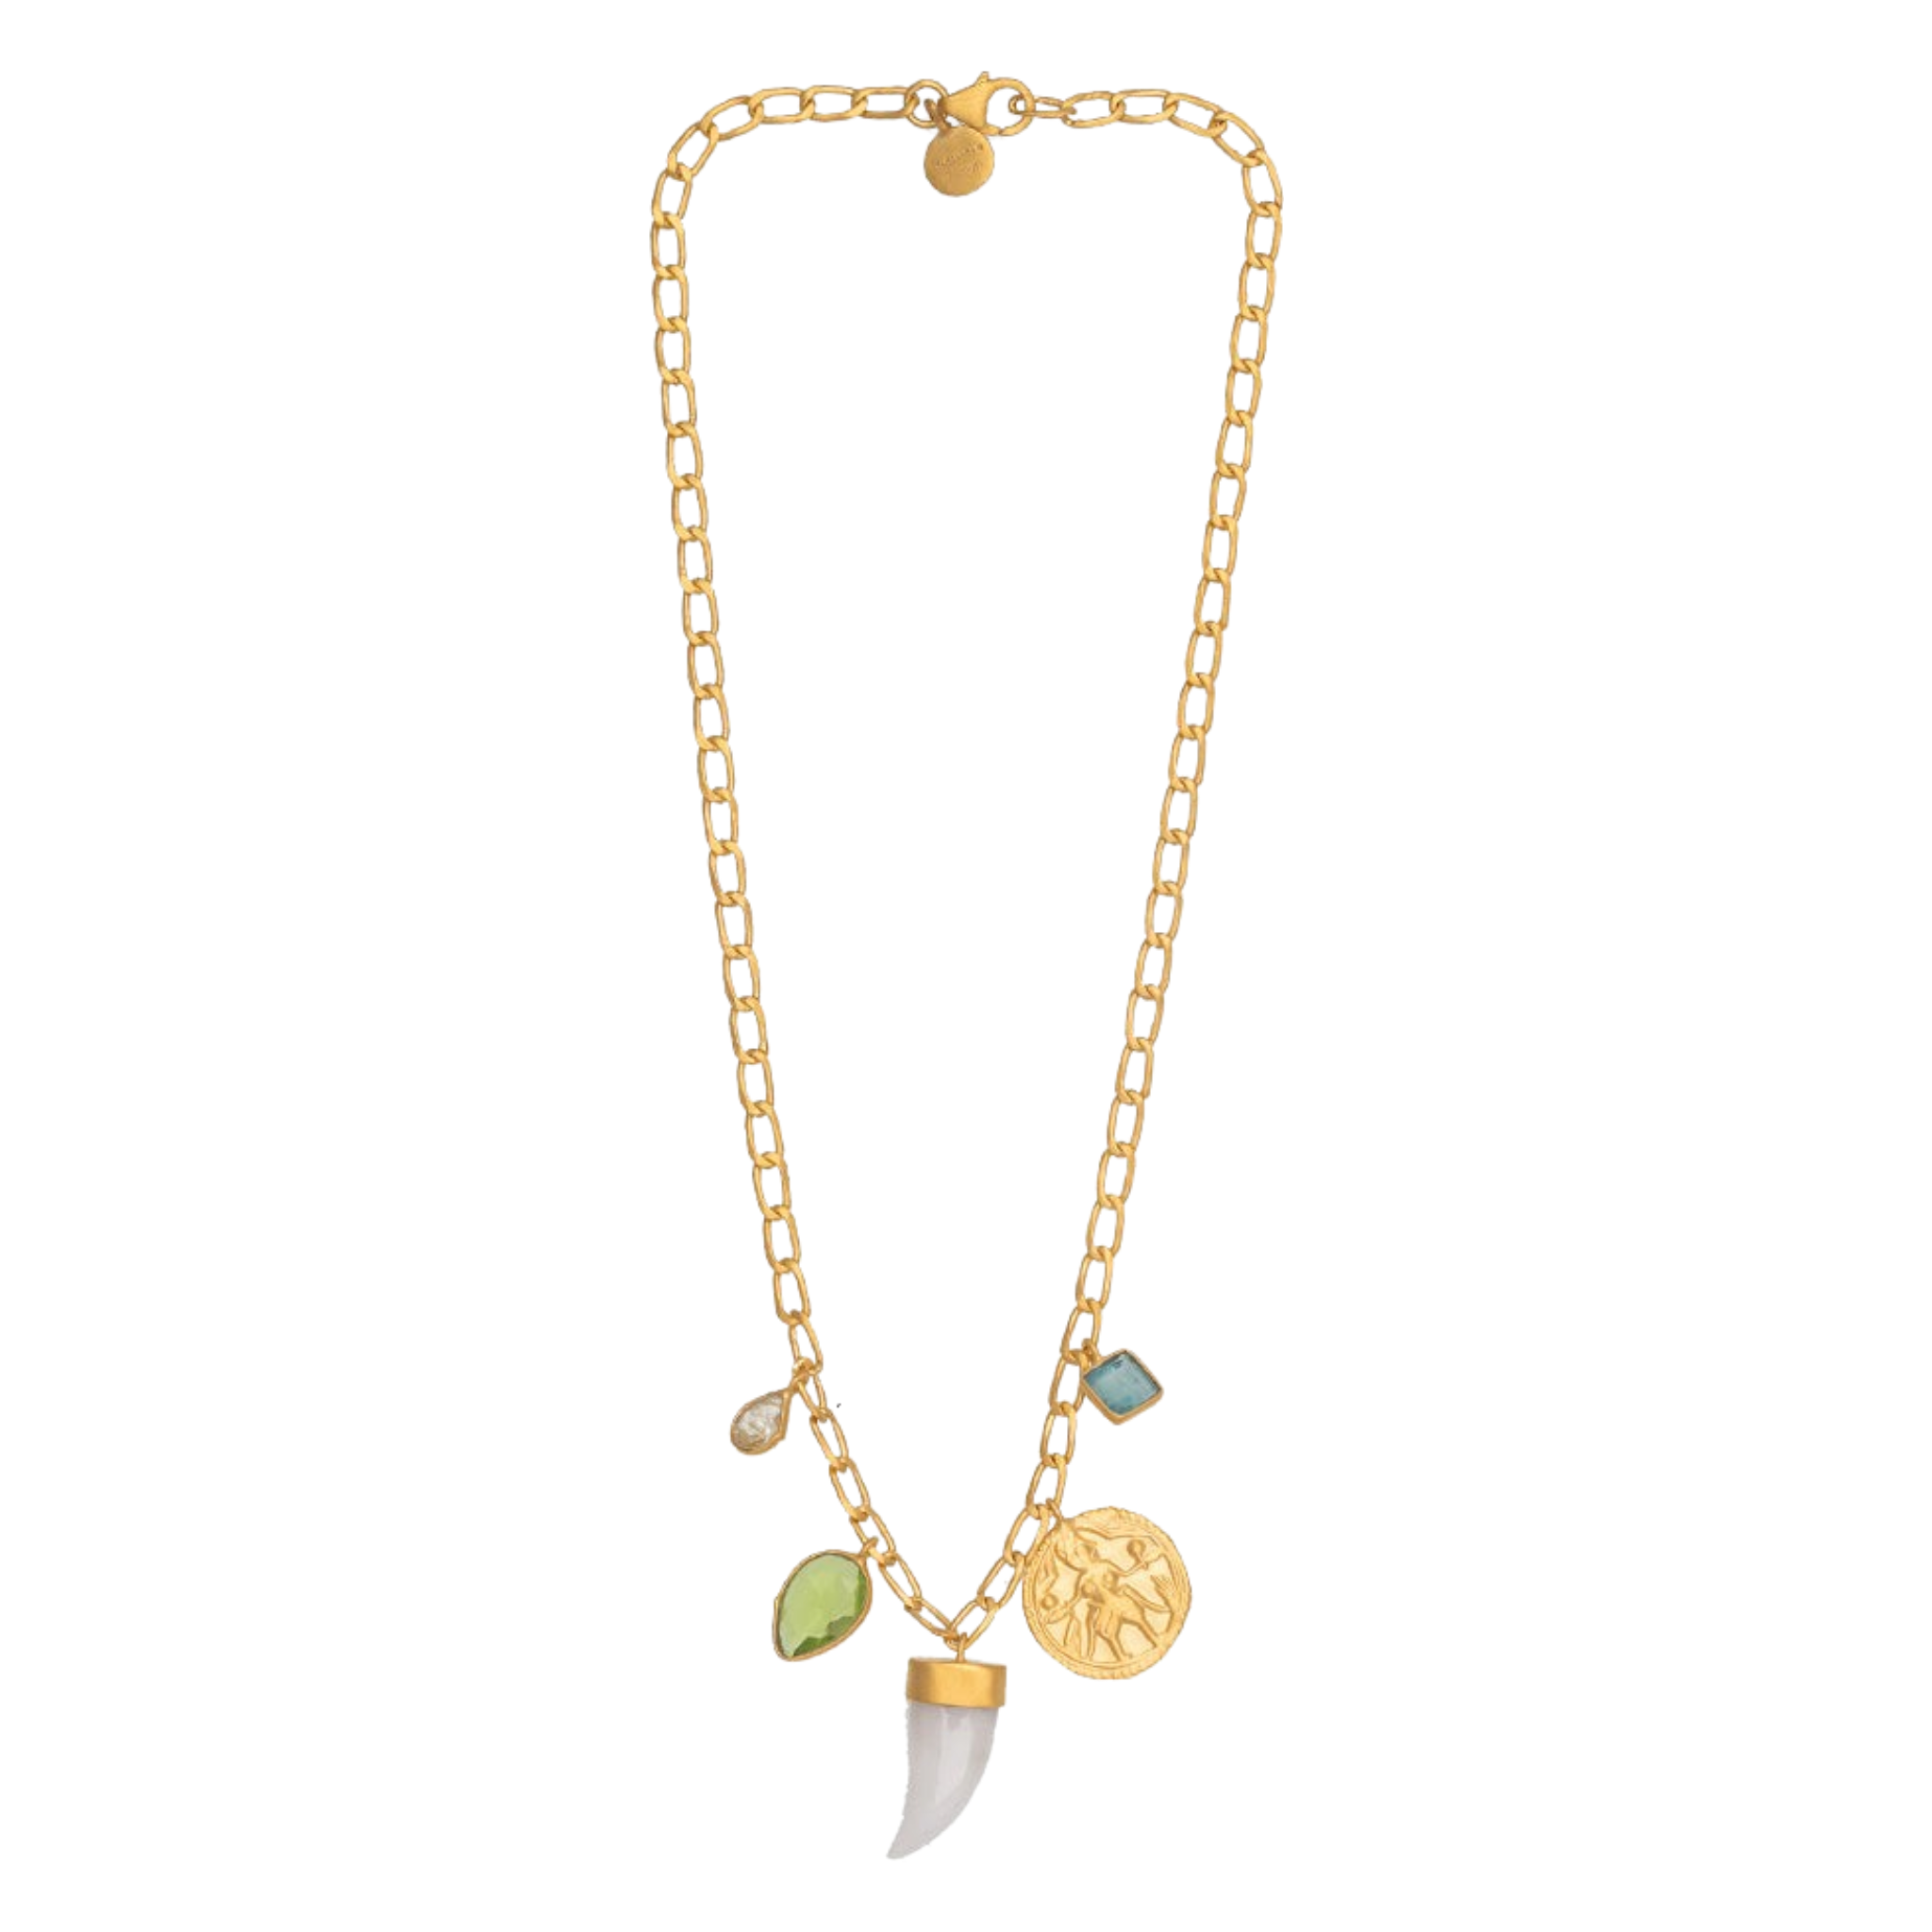 Rubyteva Horn Link White Agate Necklace with Charms